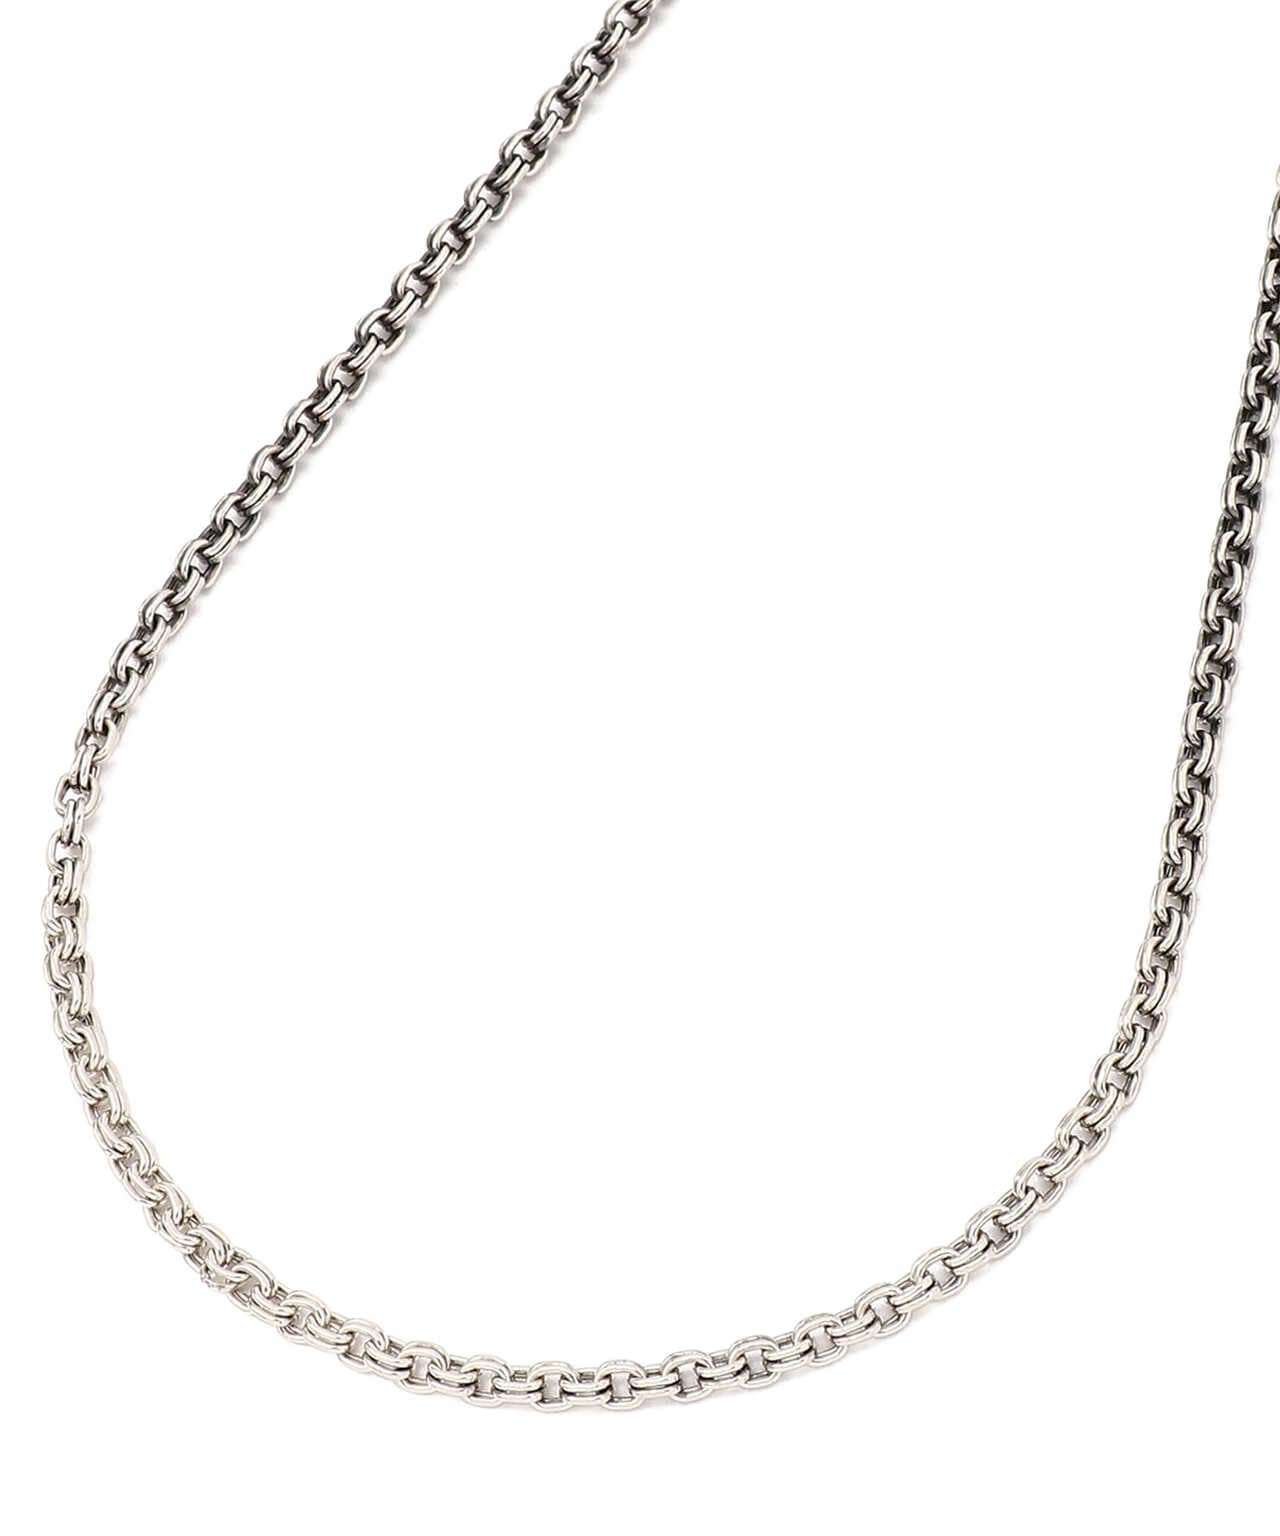 meian/メイアン/STERLING SILVER DOUBLE LINK CHAIN NECKLACE/ダブル 